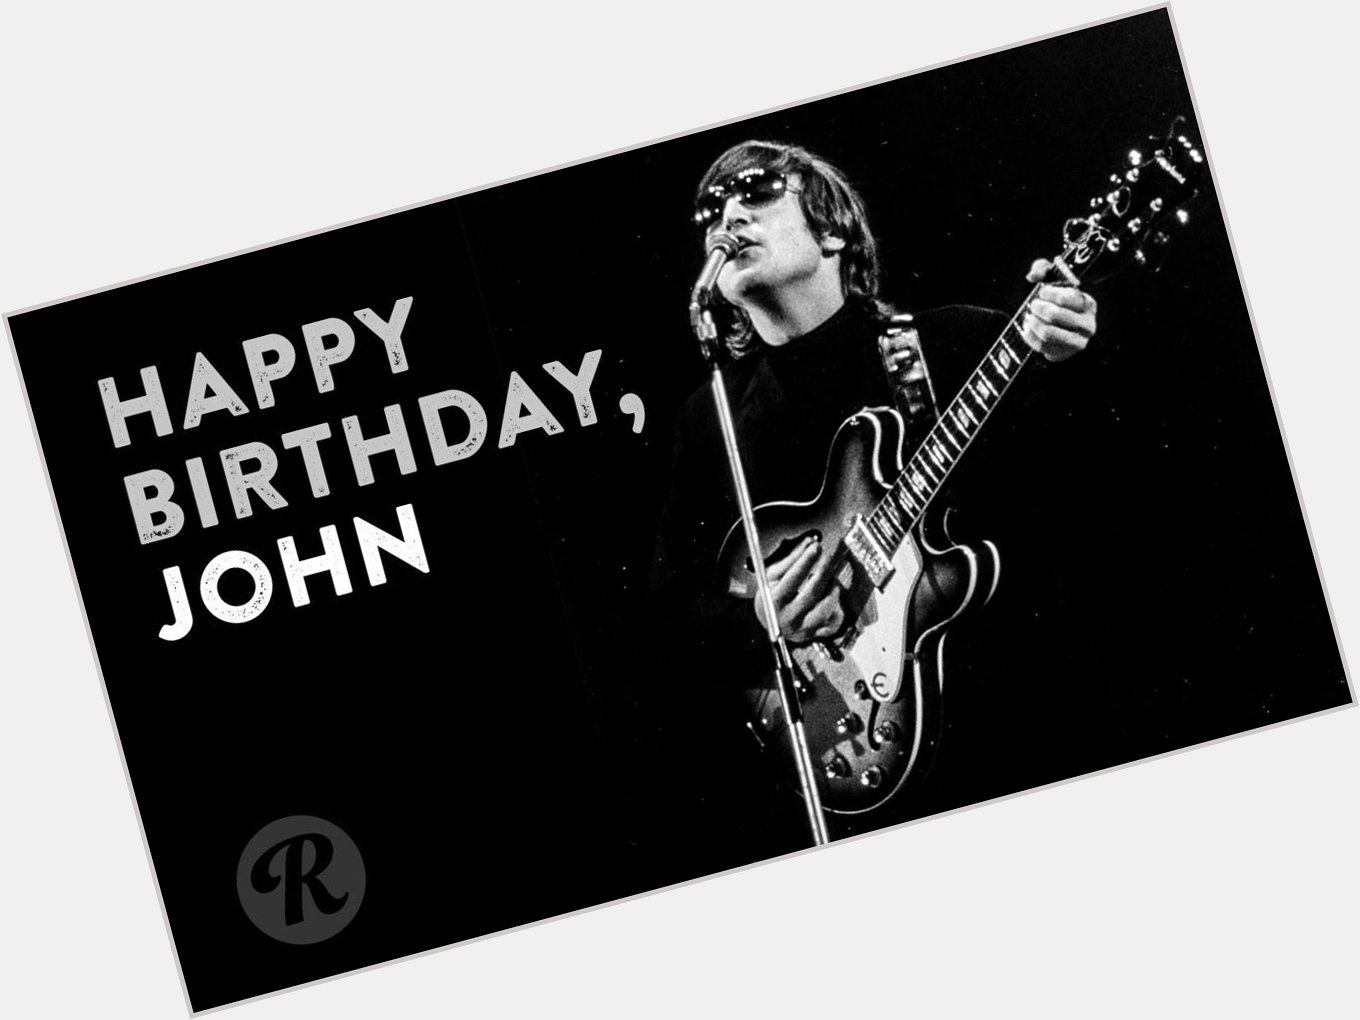 Happy Birthday, John Lennon! You would have been 75 today. We are so grateful for all you gave in the time you had. 